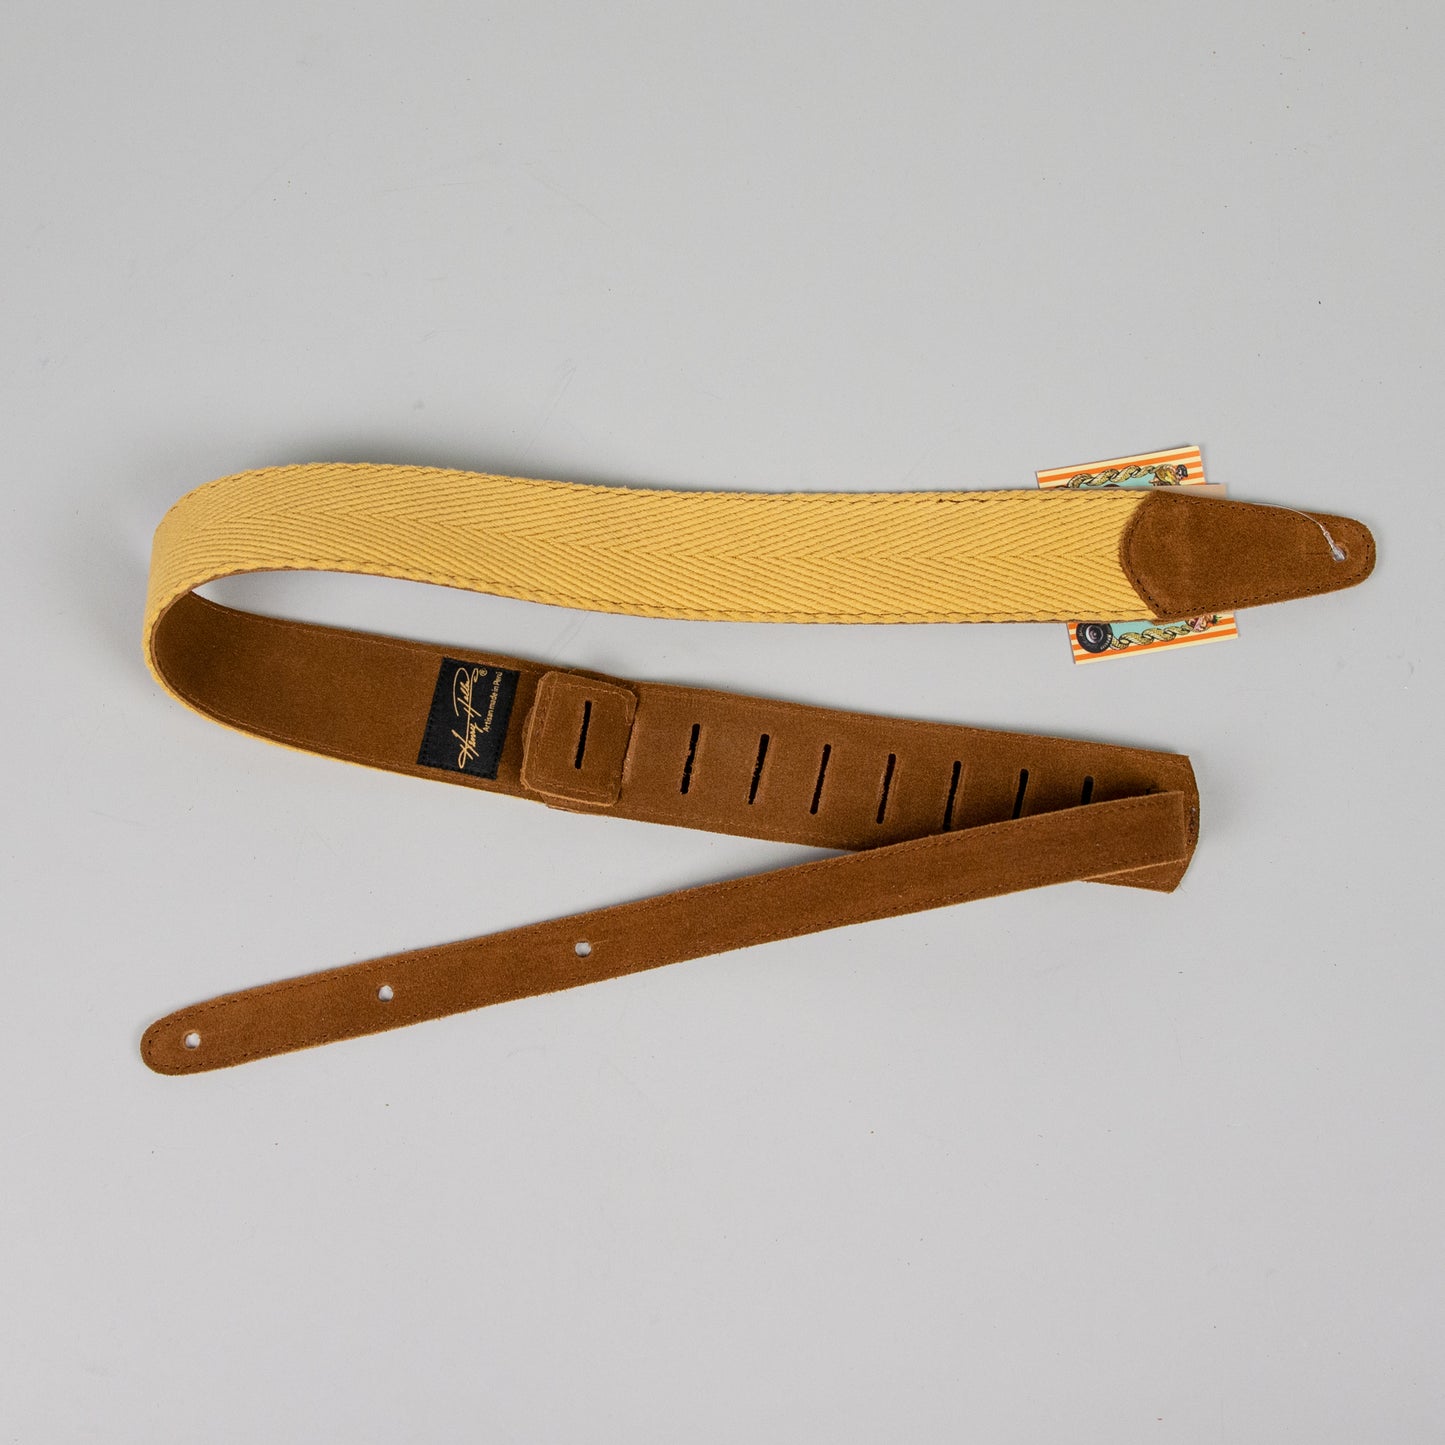 Henry Heller 2" PURE 100% Cotton Guitar Strap with Tail Adjustment, Tan